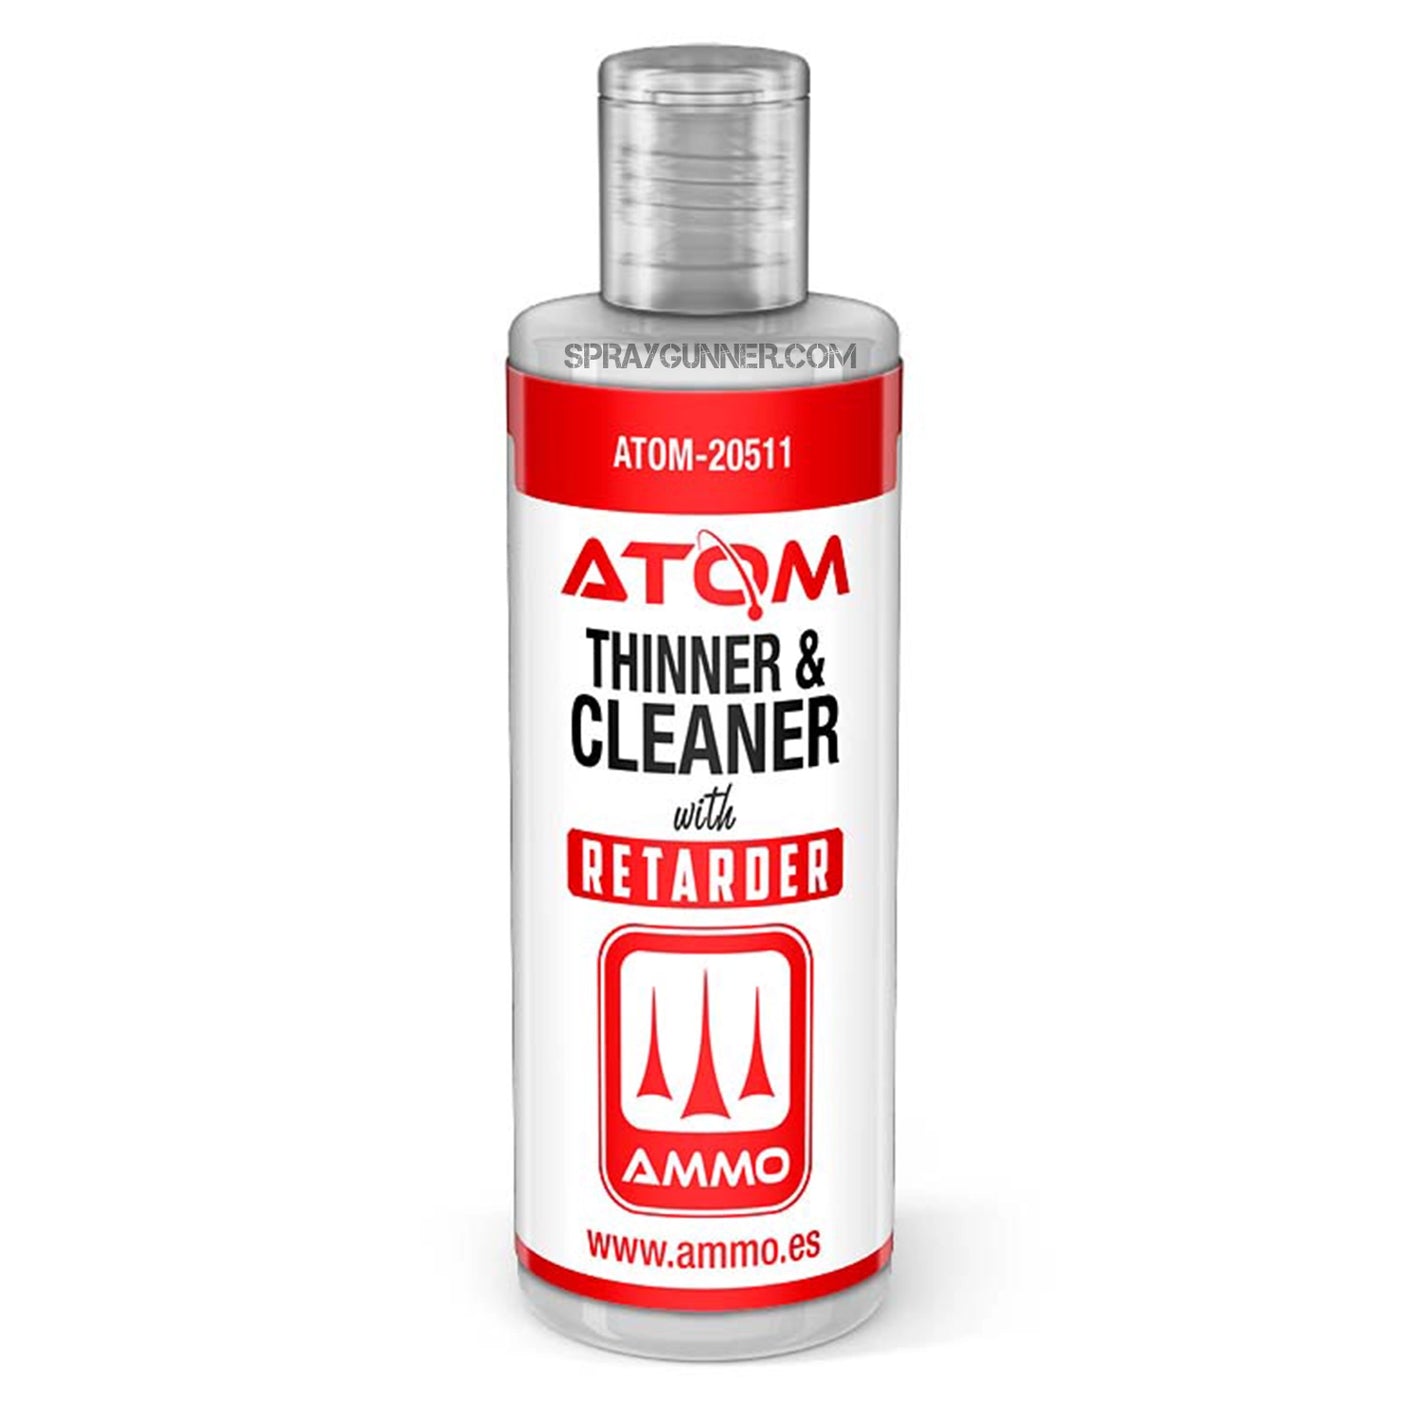 ATOM Thinner and Cleaner with Retarder 60mL